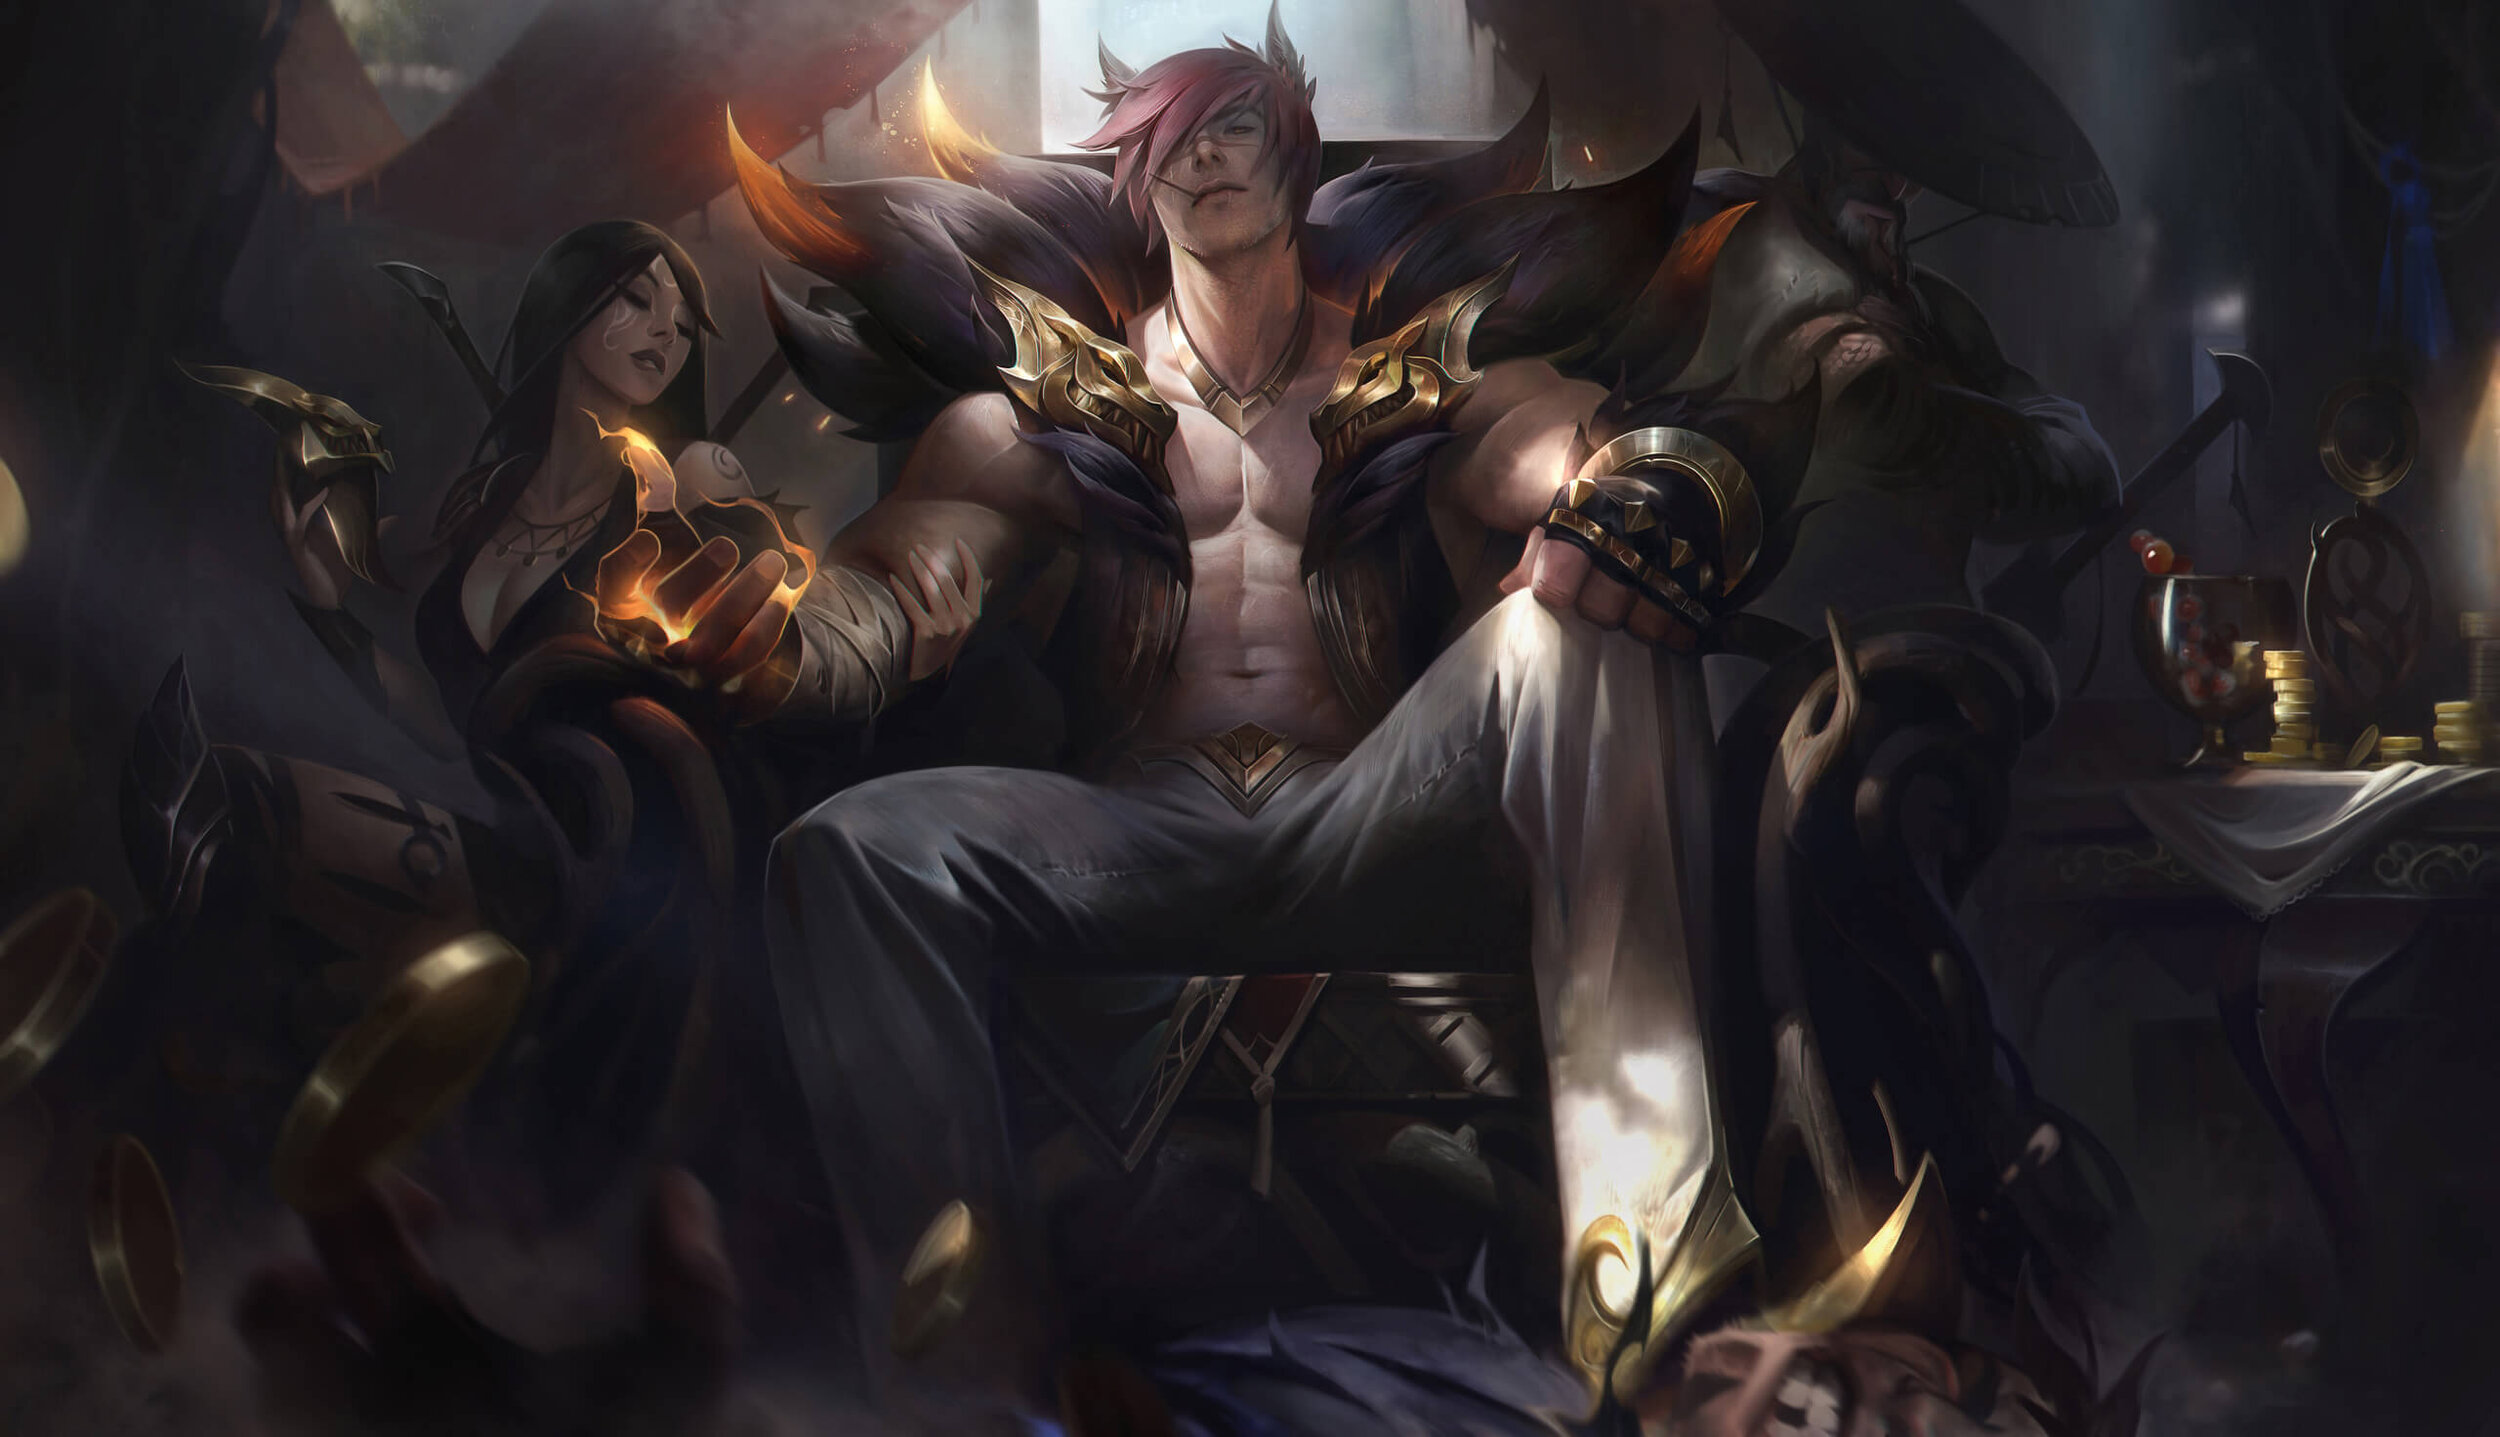 League of Legends Tier List: The Best Champions in Patch 10.14